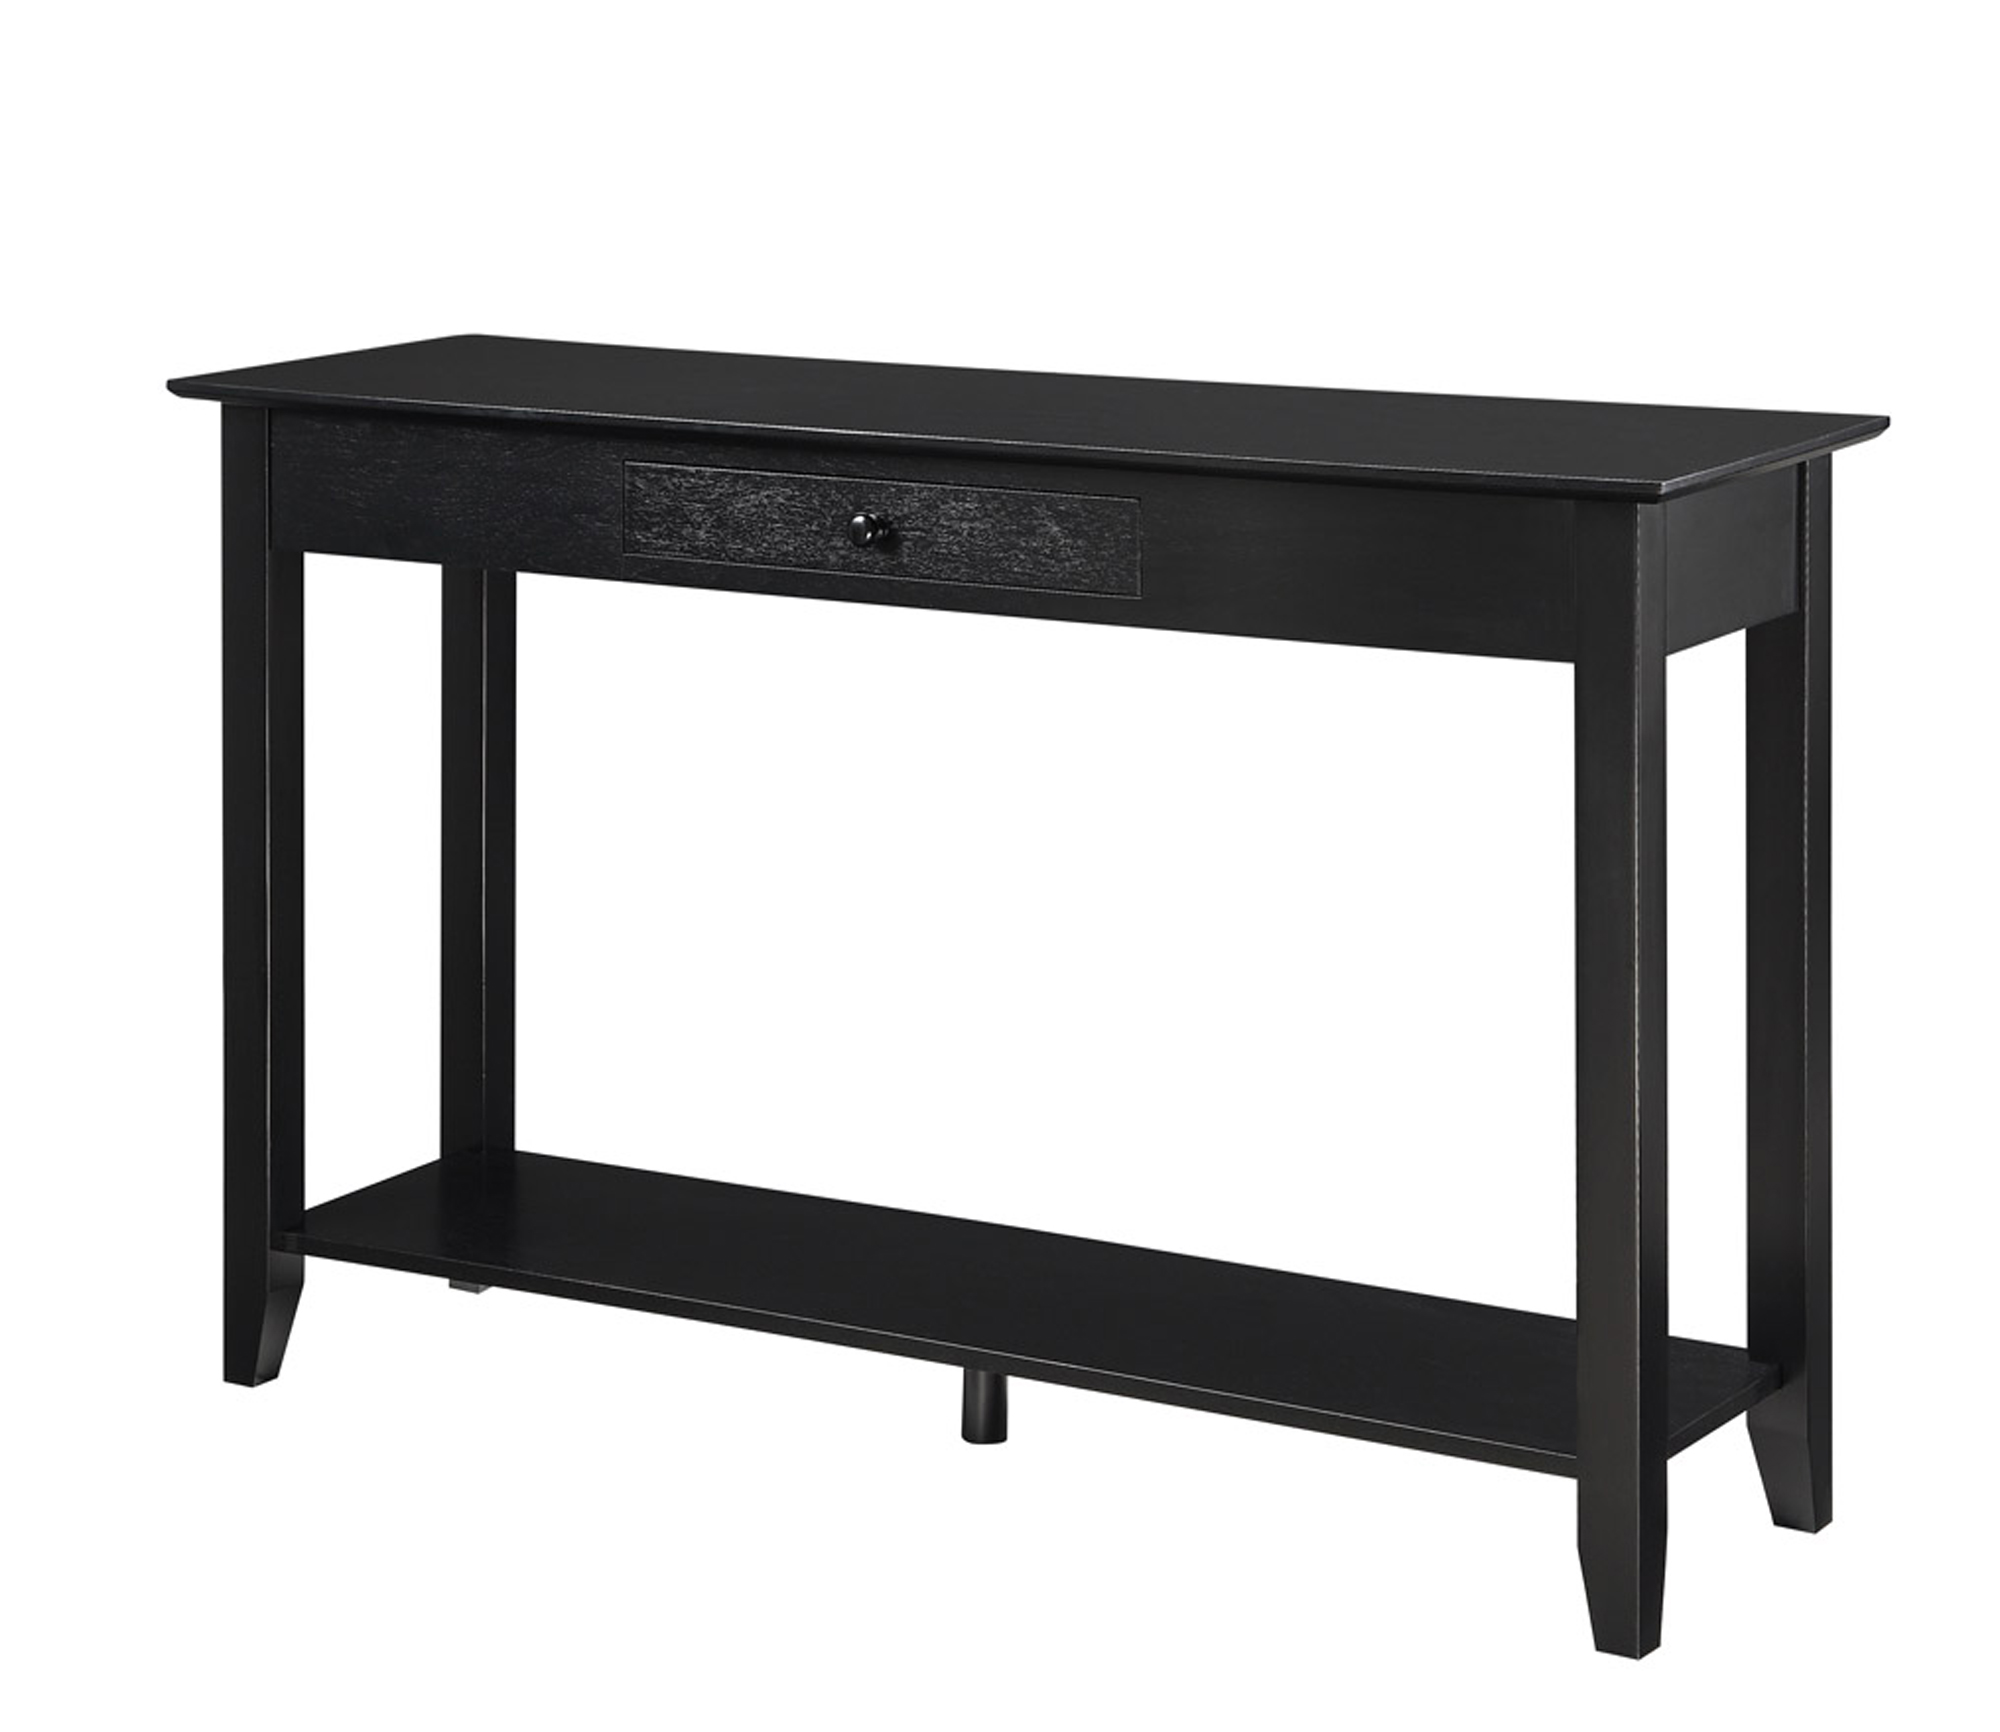 American Heritage Console Table with Drawer in Black -  Convenience Concepts, HI202161